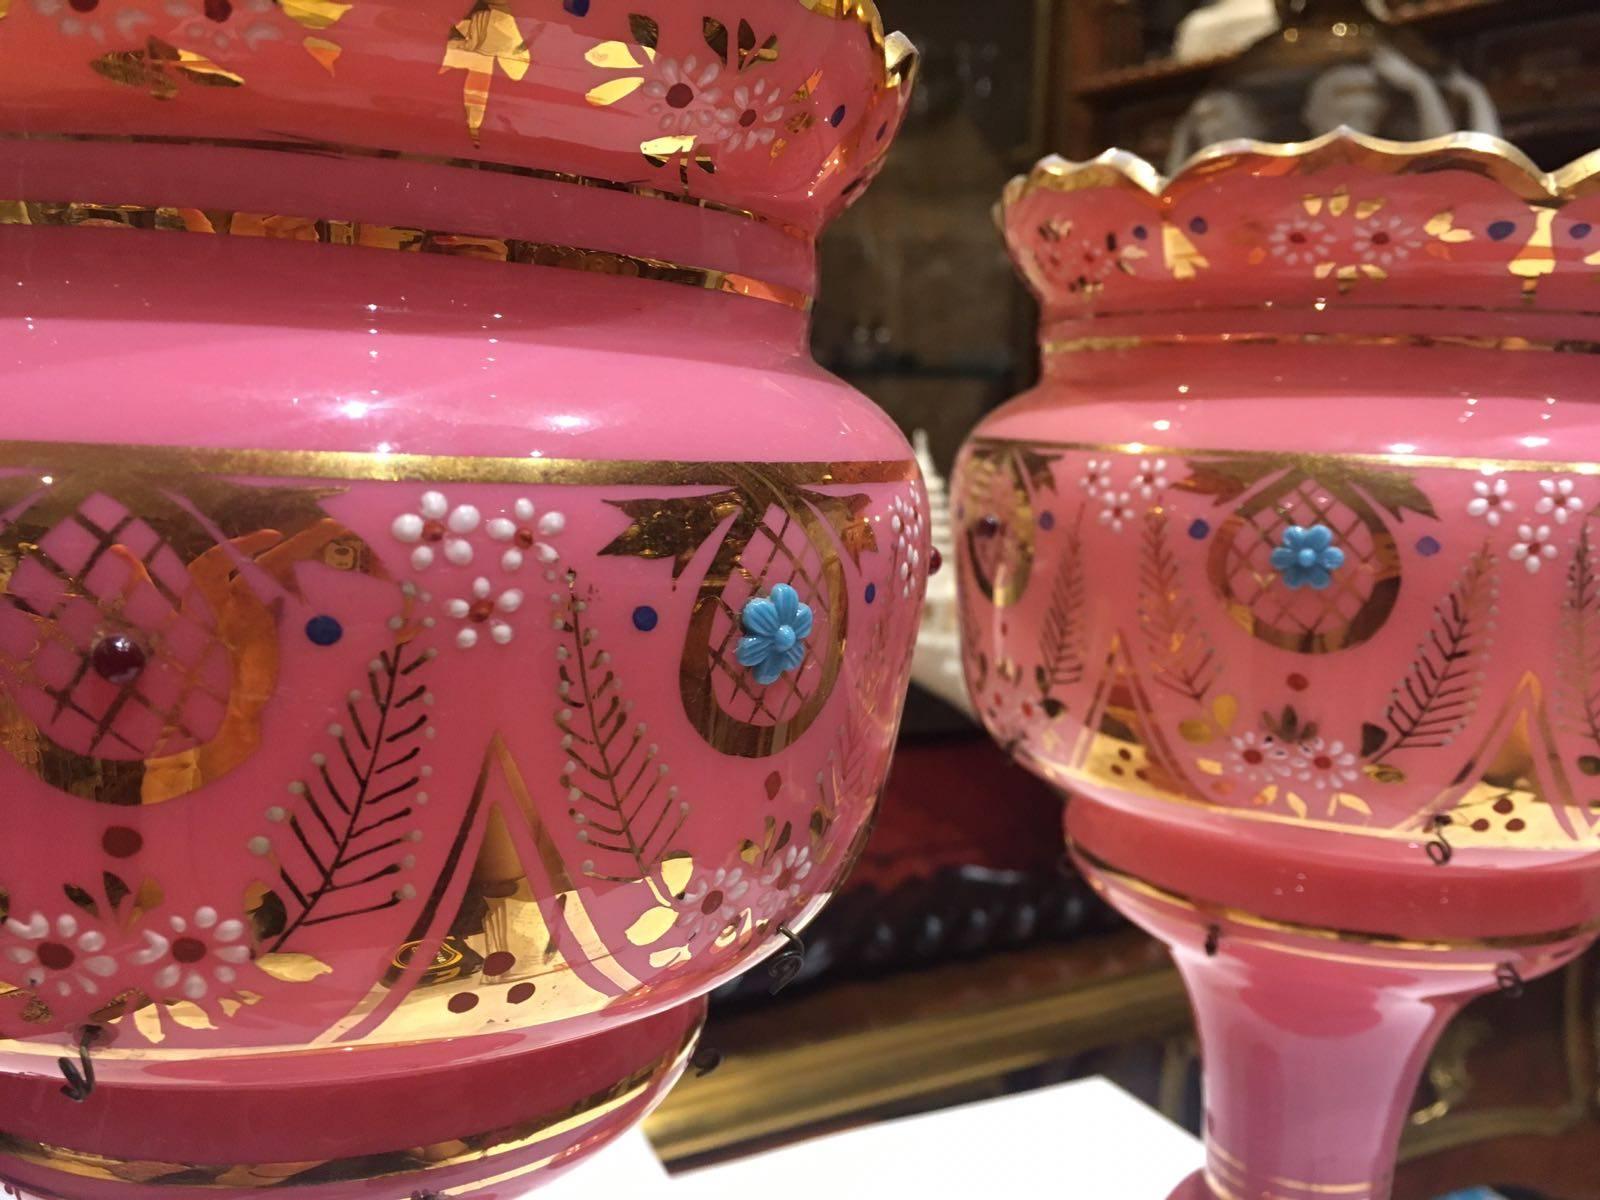 Pair of bright pink mantle lustres with floral and foliate enamelling

Measures: D 16.5cm, H 31cm.